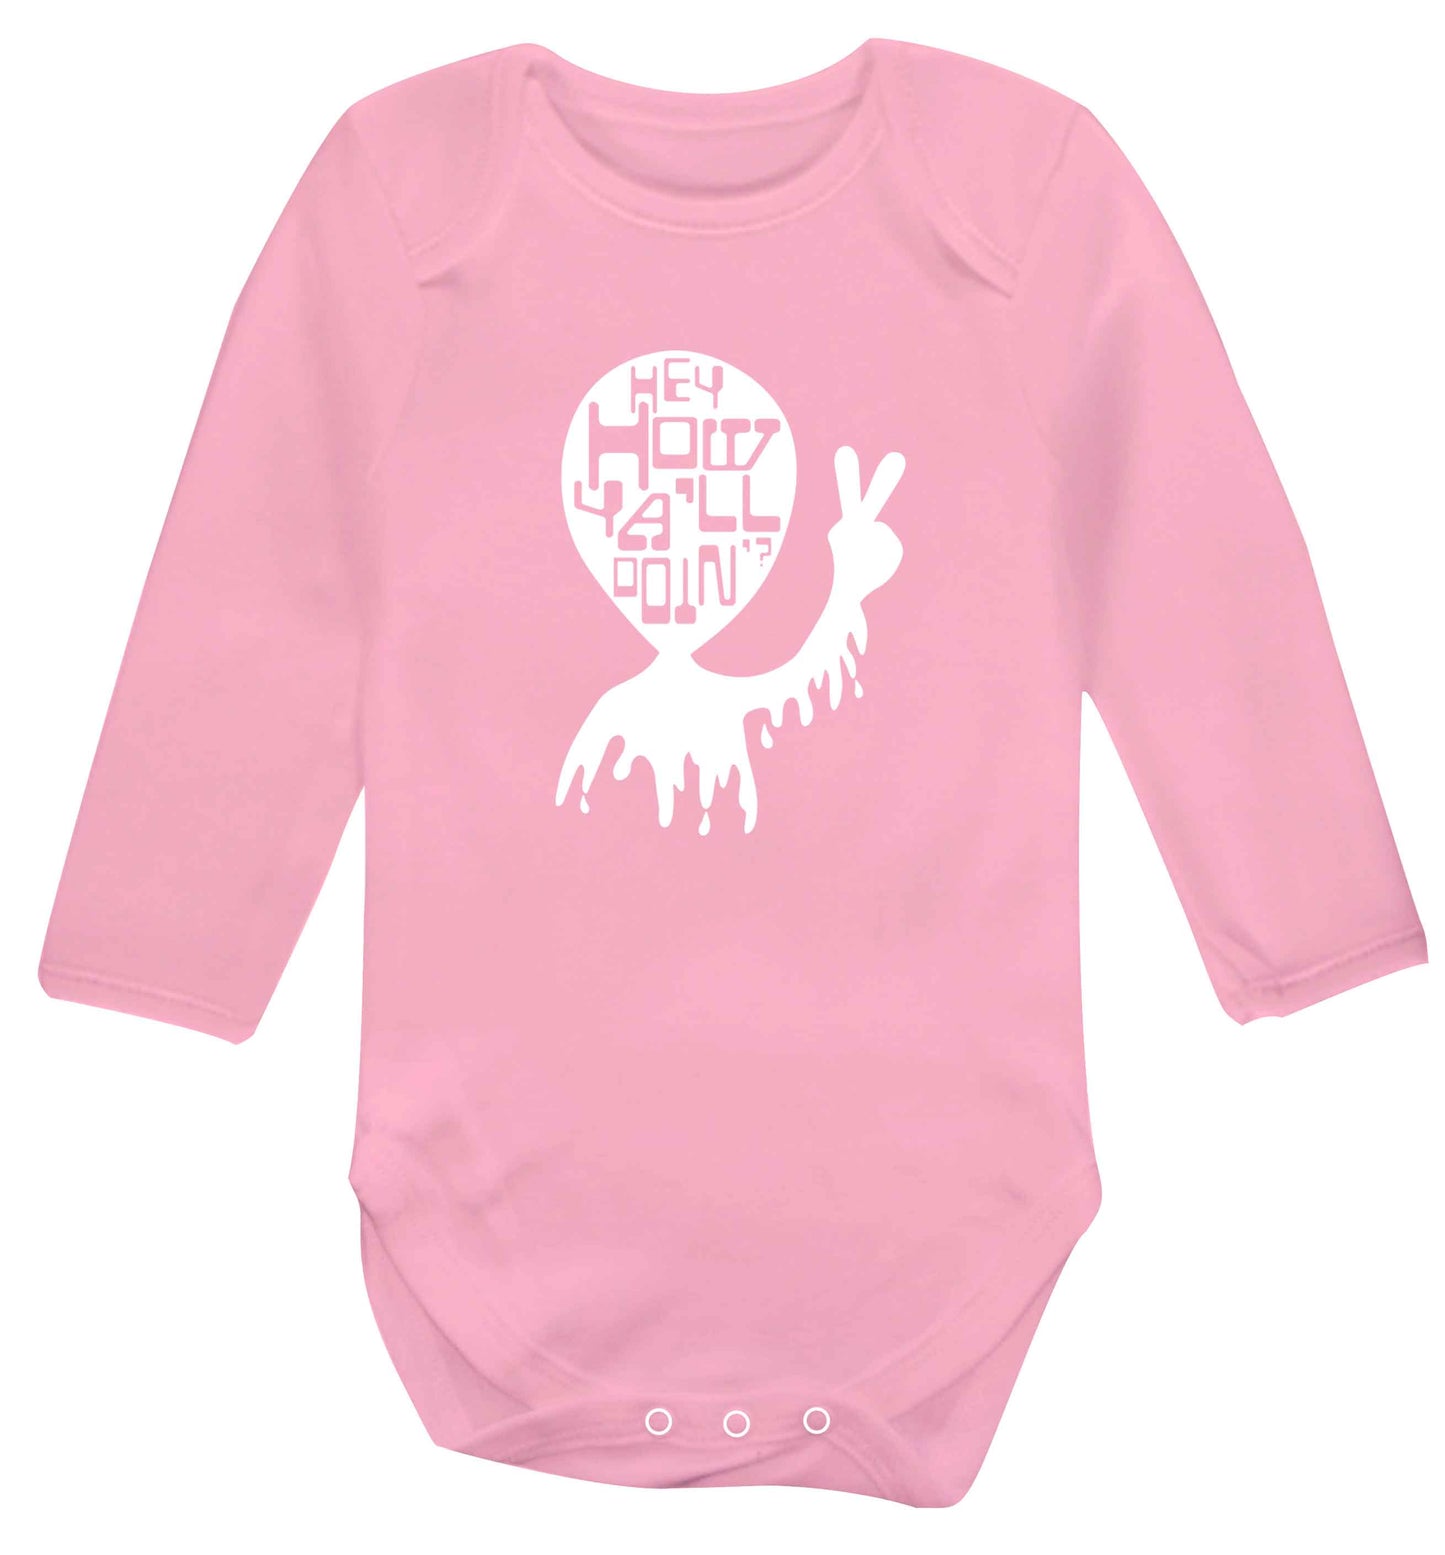 Misheard song lyrics - check!  baby vest long sleeved pale pink 6-12 months